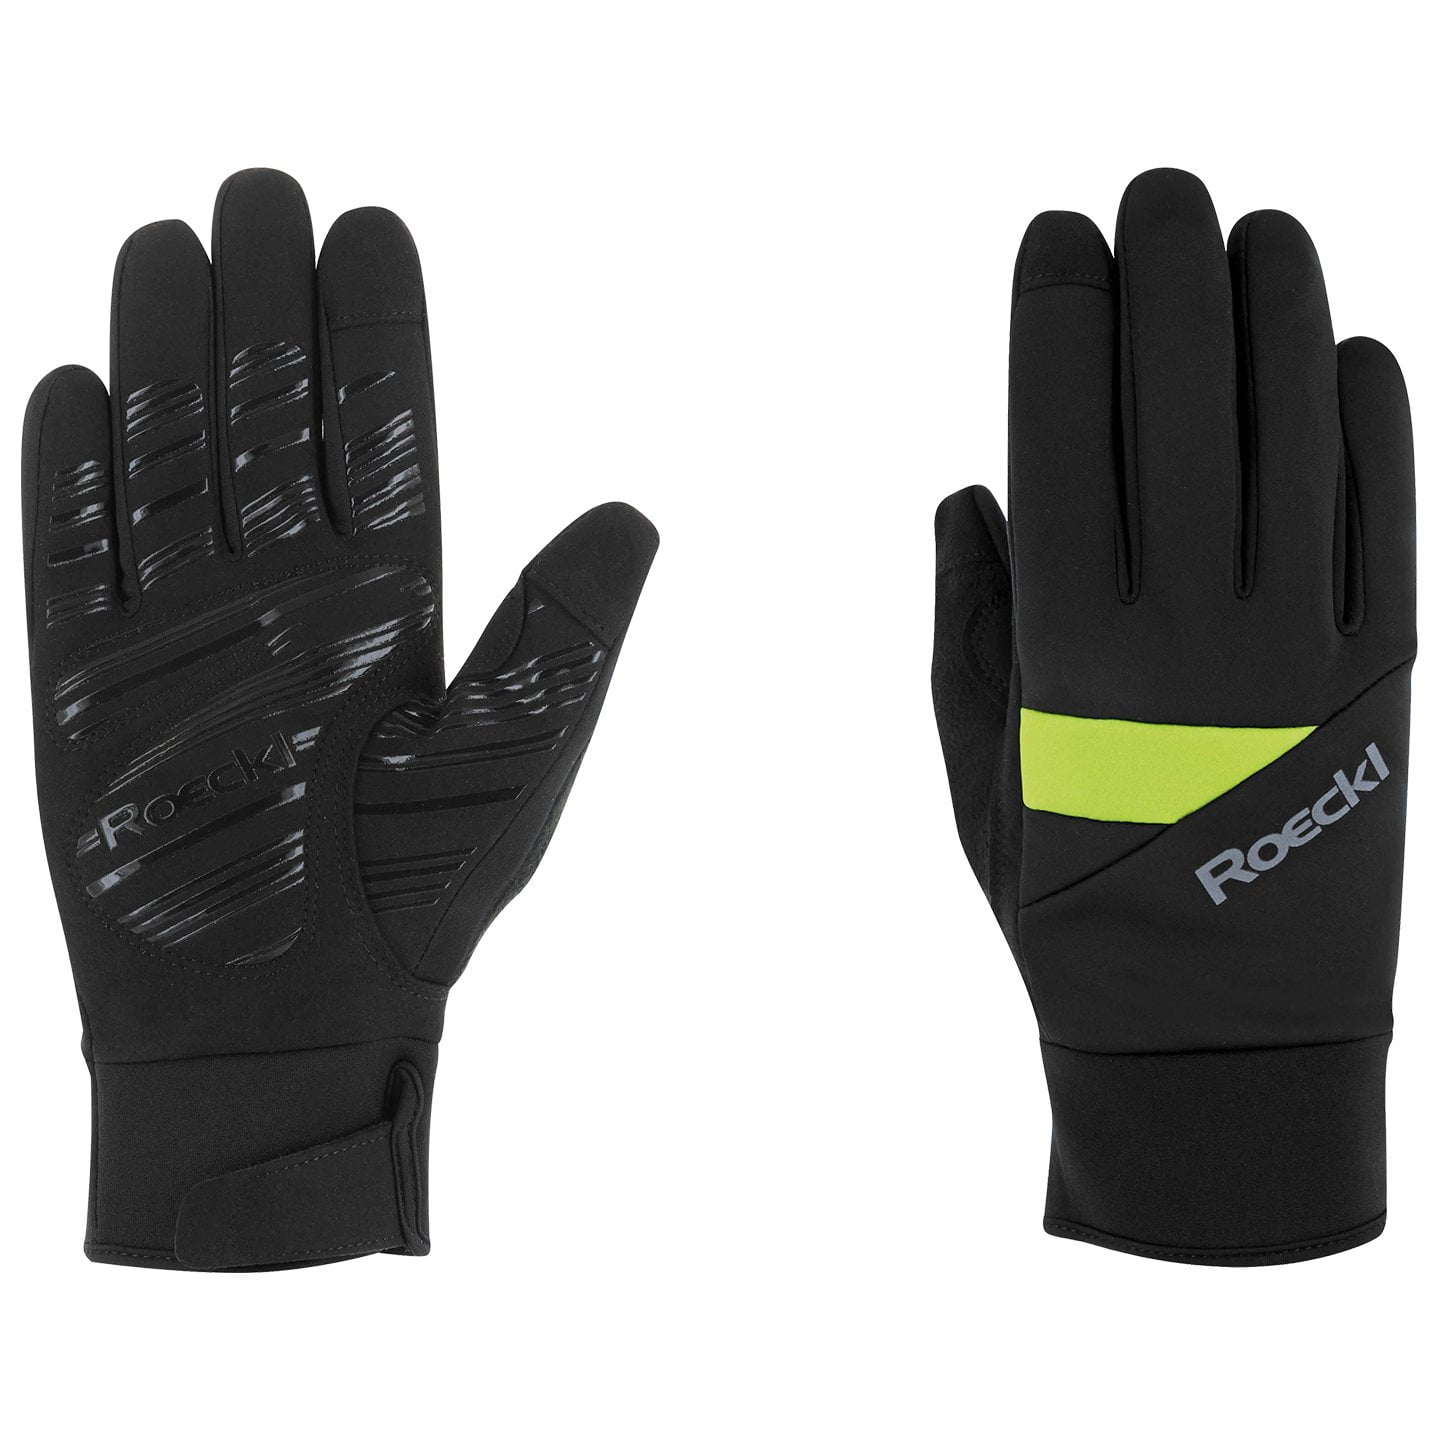 ROECKL Reichenthal jr. Kids Winter Gloves Winter Cycling Gloves, for men, size 6, MTB gloves, MTB clothing